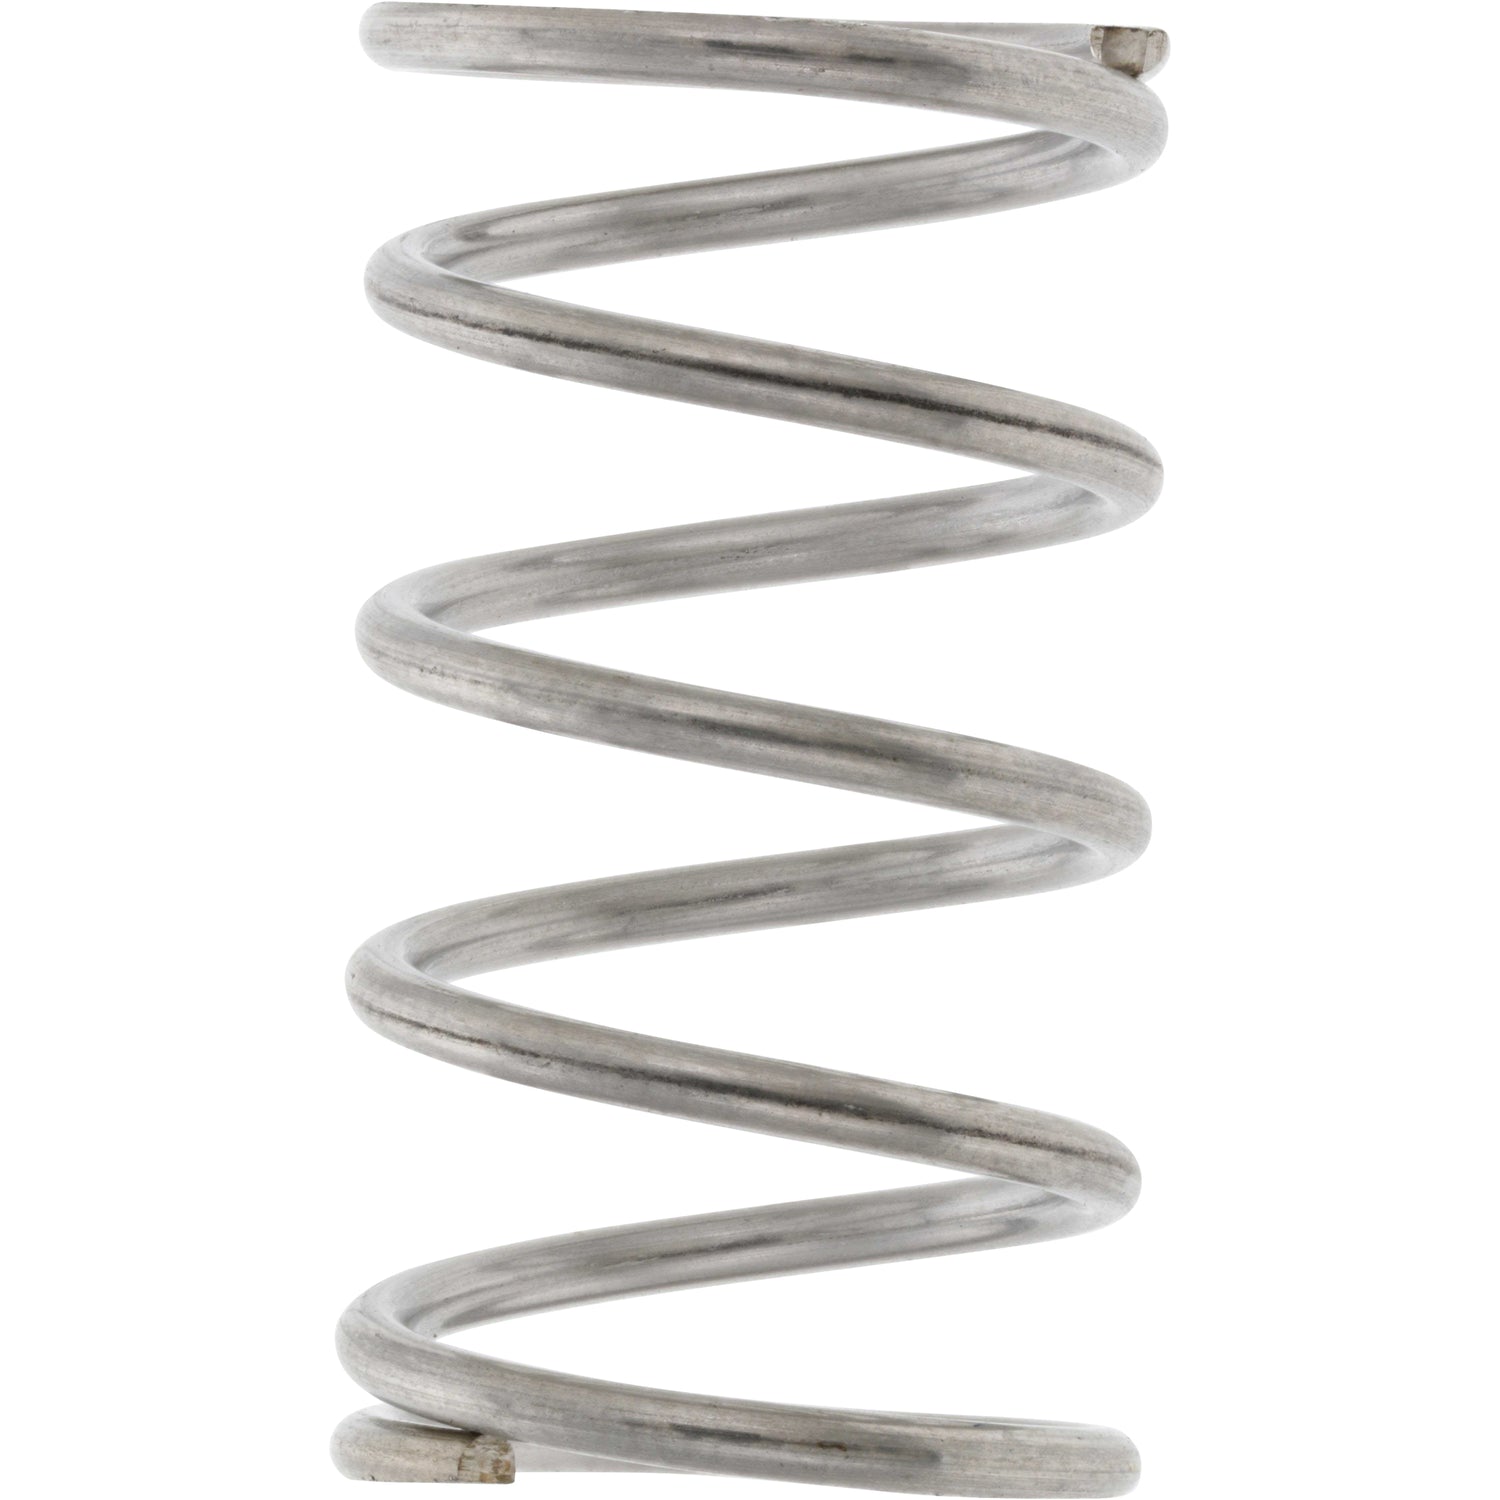 302 Stainless Steel Corrosion-Resistant Compression Spring standing on its end, shown on a white background: 9435K116